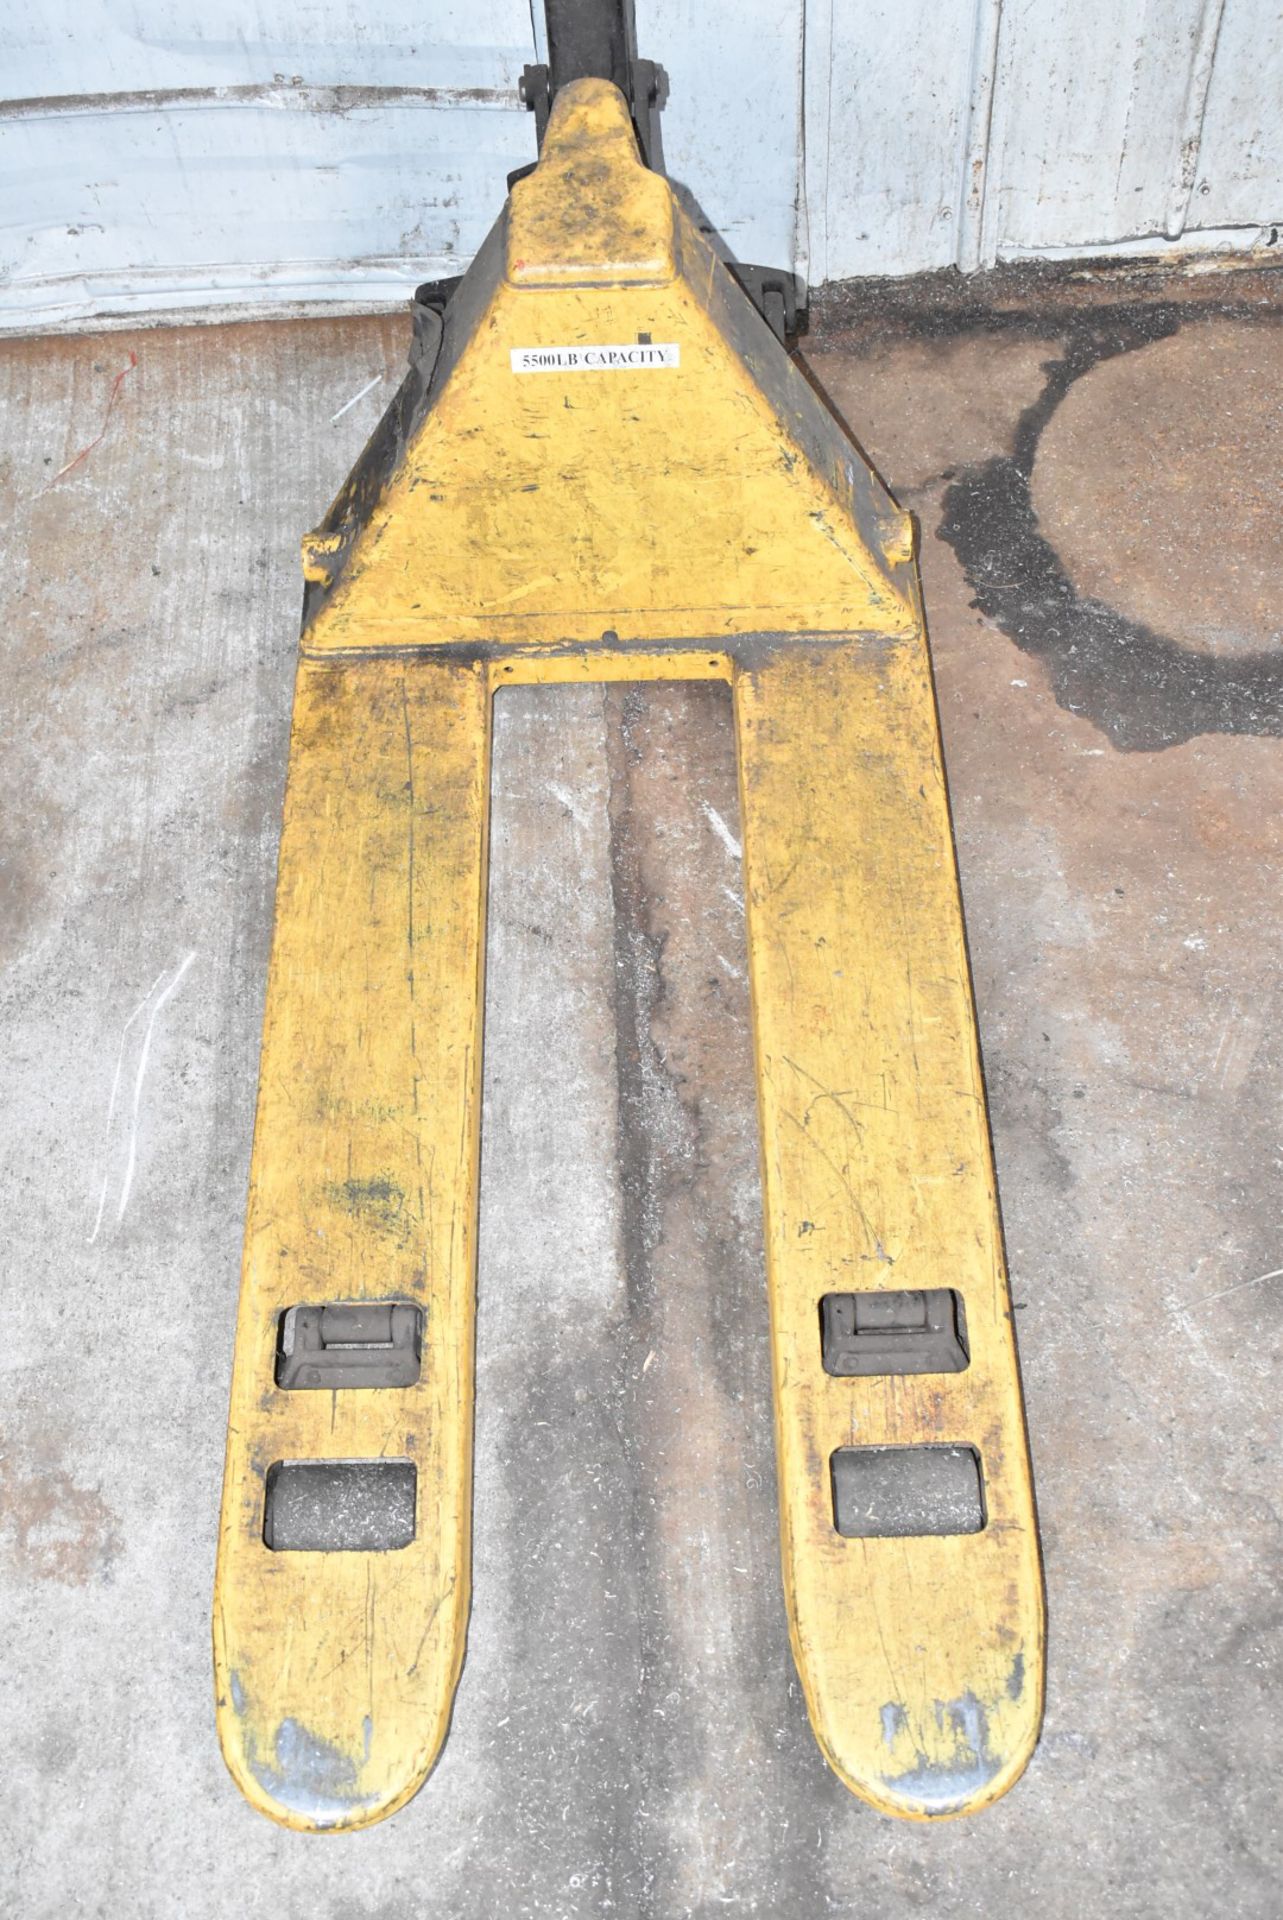 ULINE H-1366 HYDRAULIC PALLET JACK WITH 5,500 LB CAPACITY, S/N 376624 - Image 2 of 3